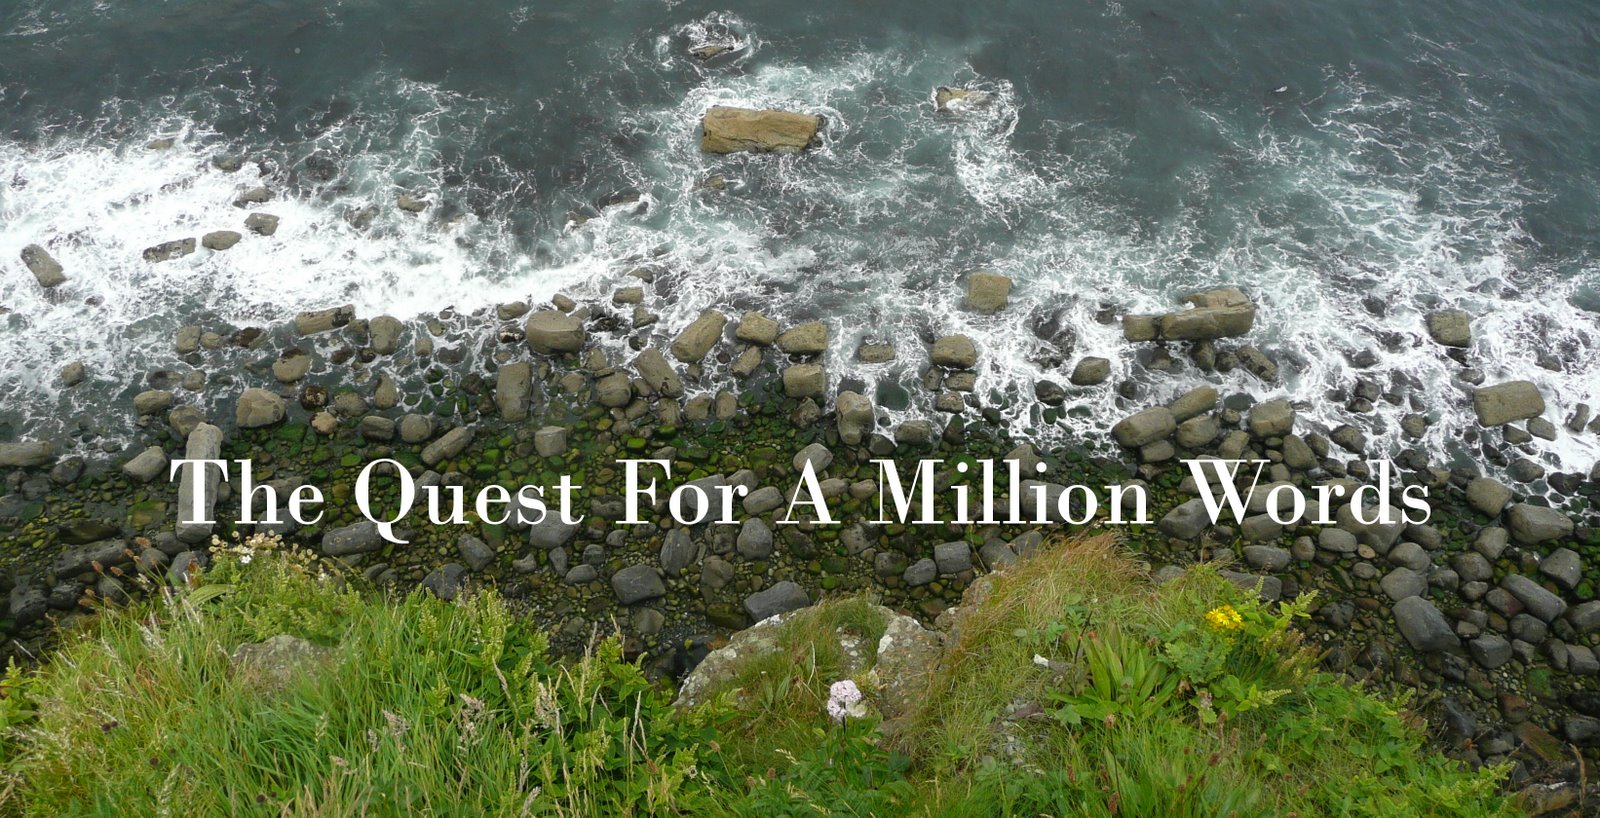 The Quest for a Million Words